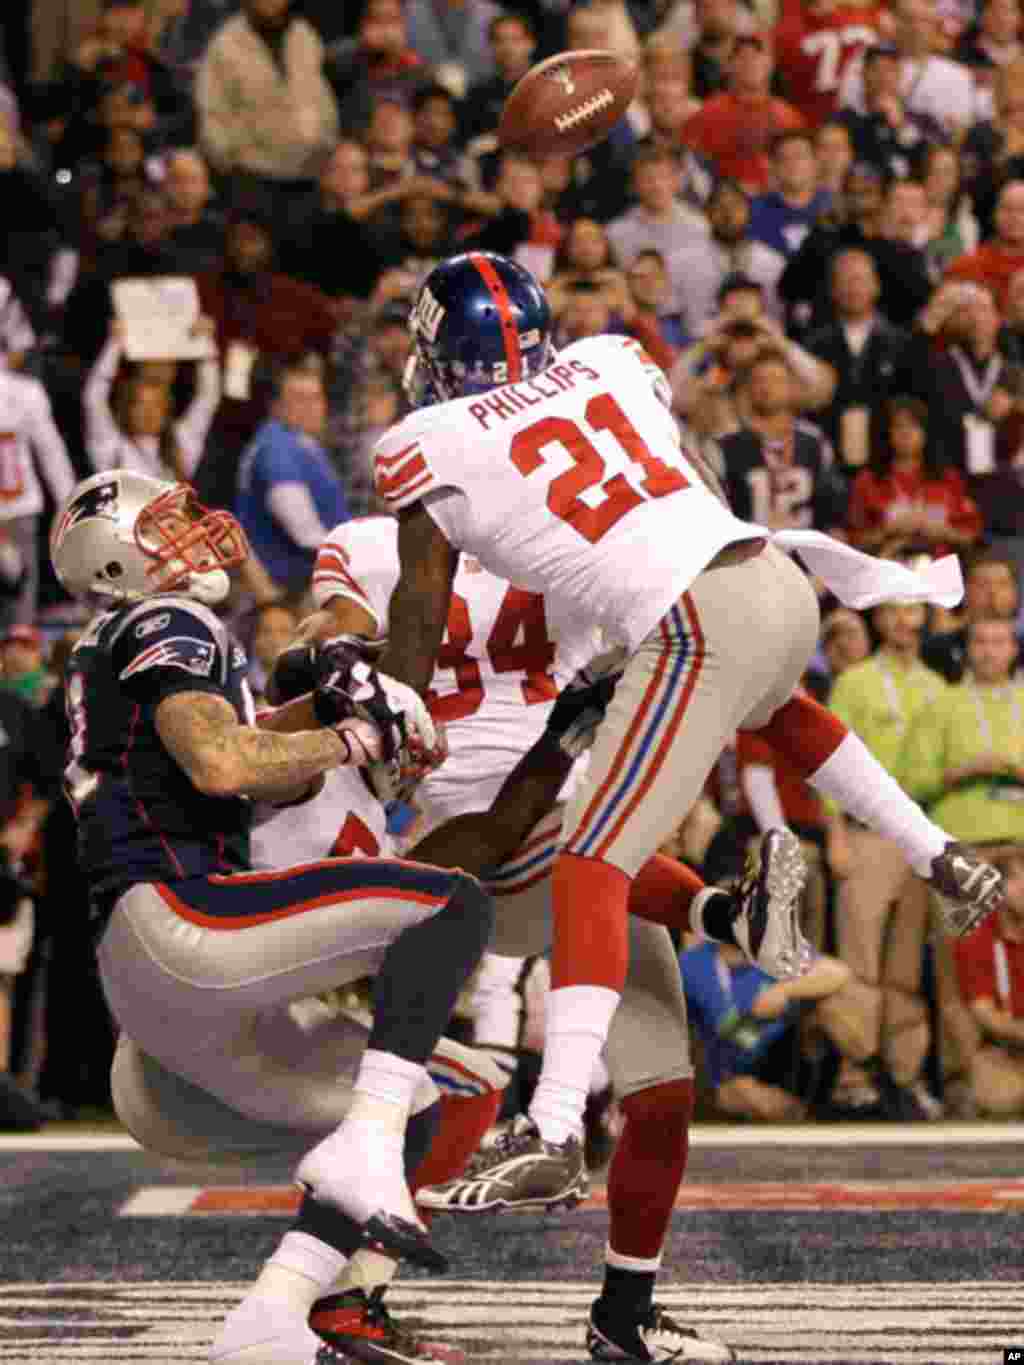 New York Giants safety Kenny Phillips (21) breaks up a pass intended for New England Patriots tight end Aaron Hernandez, left, during the second half of the NFL Super Bowl XLVI football game, February 5, 2012, in Indianapolis, Indiana. (AP)